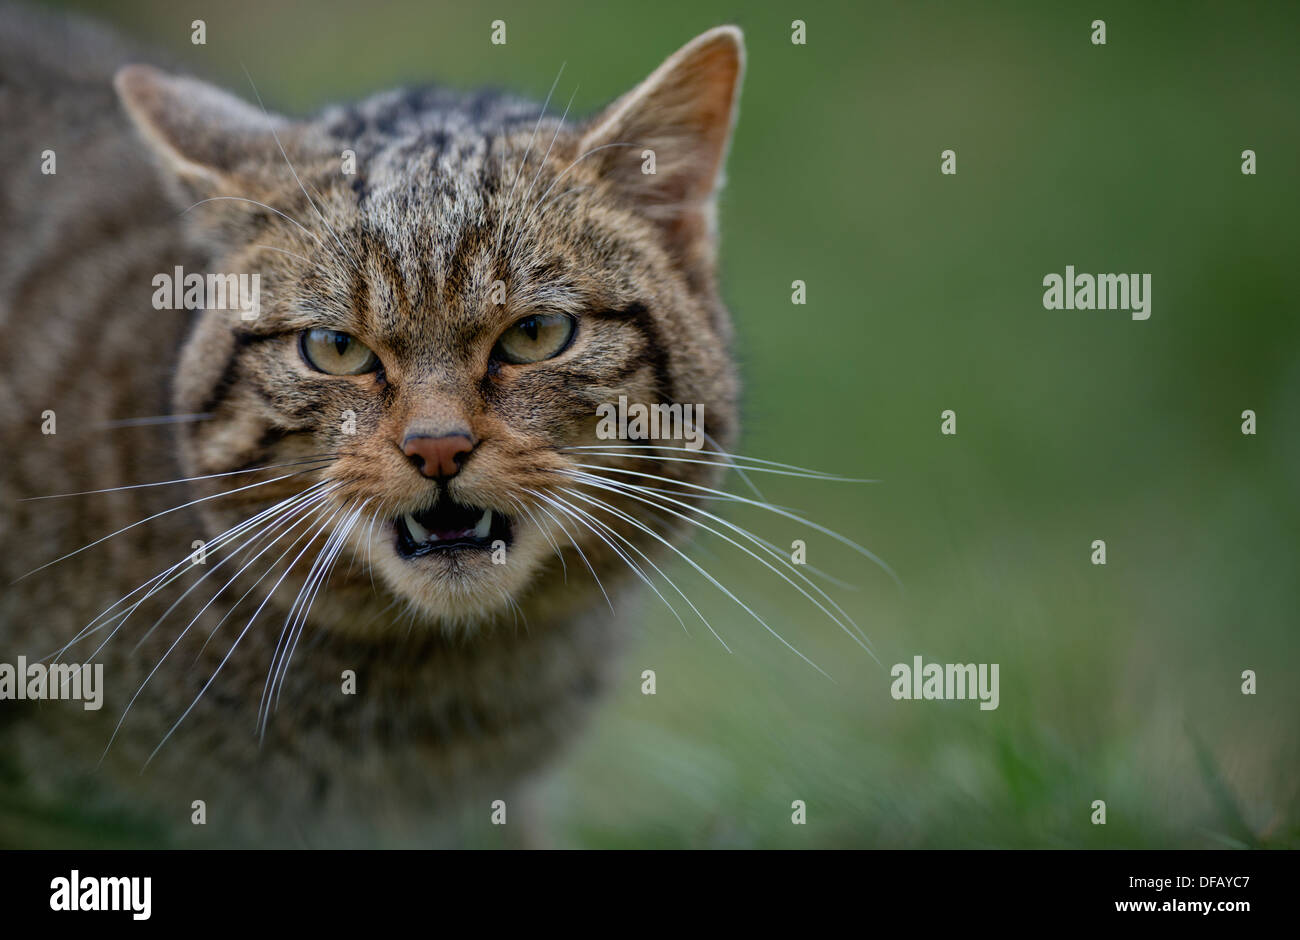 Scottish wildcat growling from the grass Stock Photo